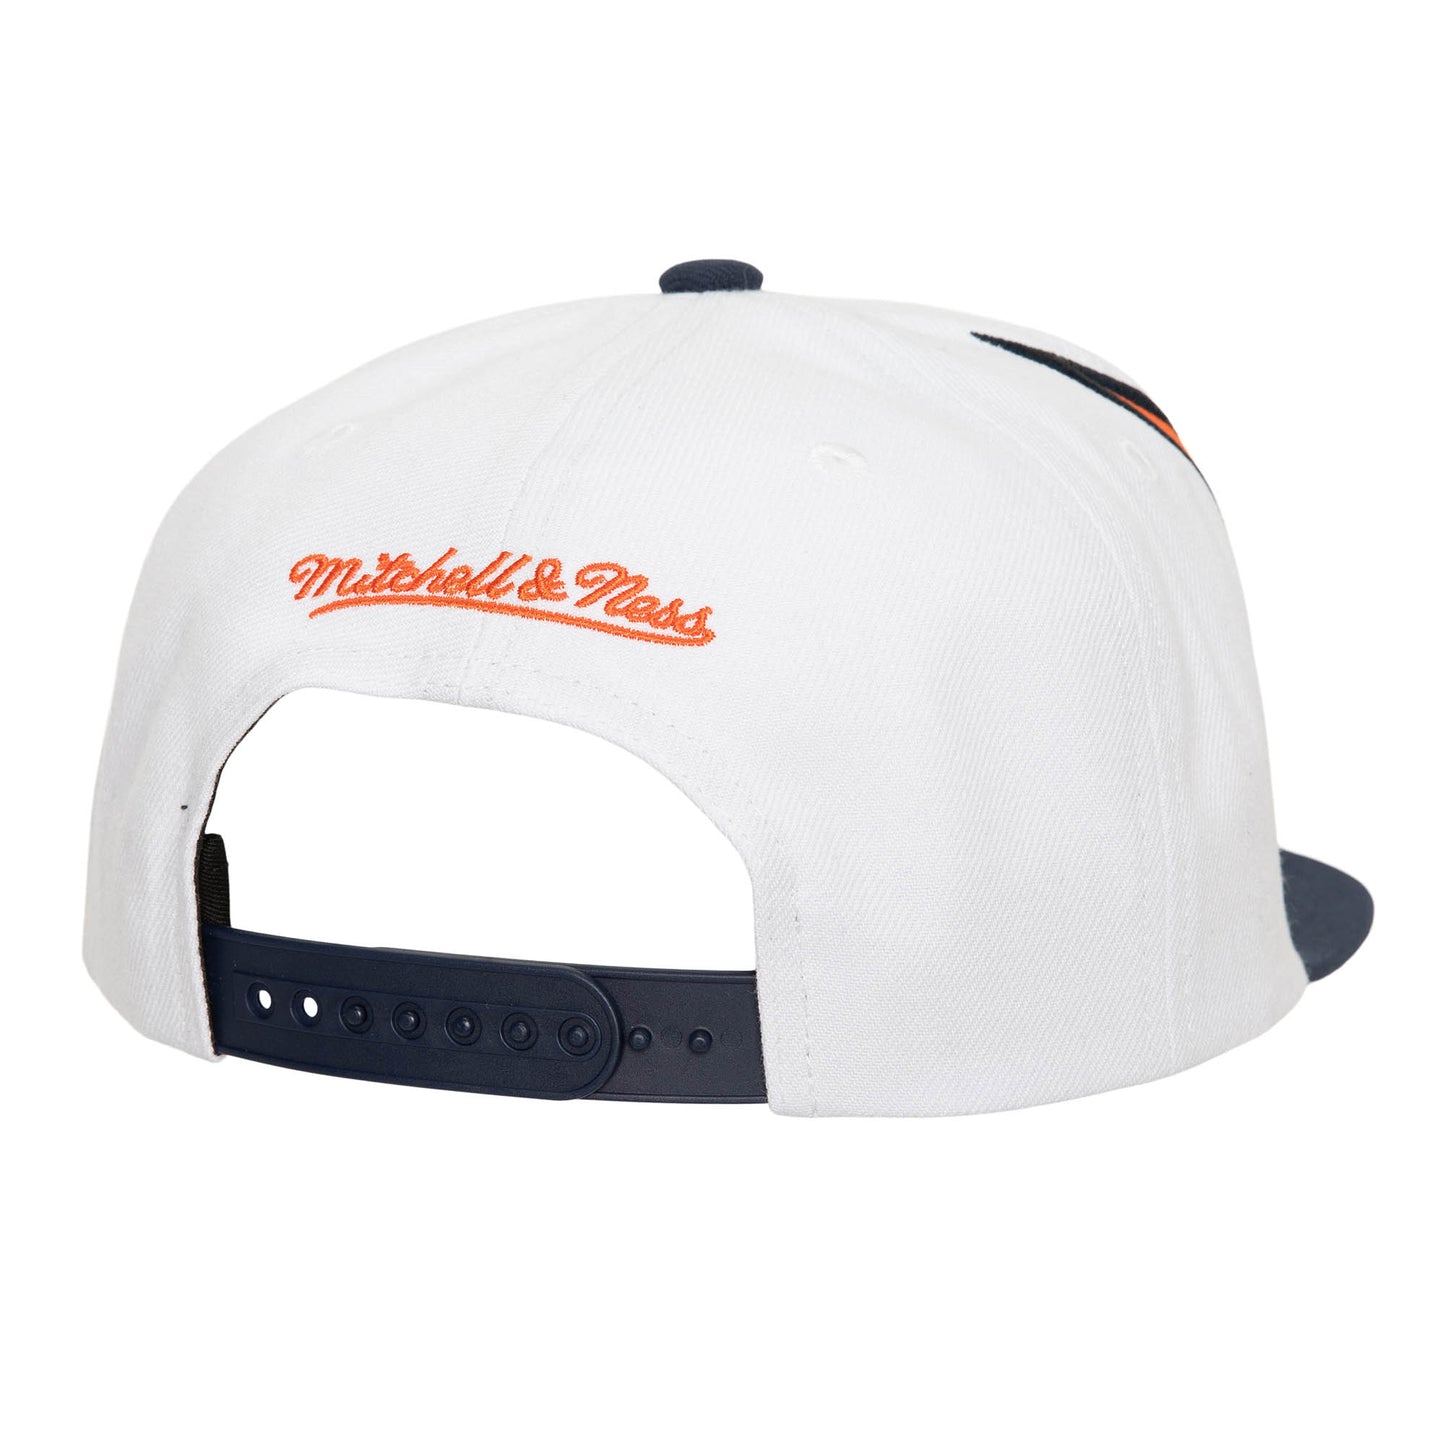 Detroit Tigers Mitchell & Ness Wave Runner Snapback Hat